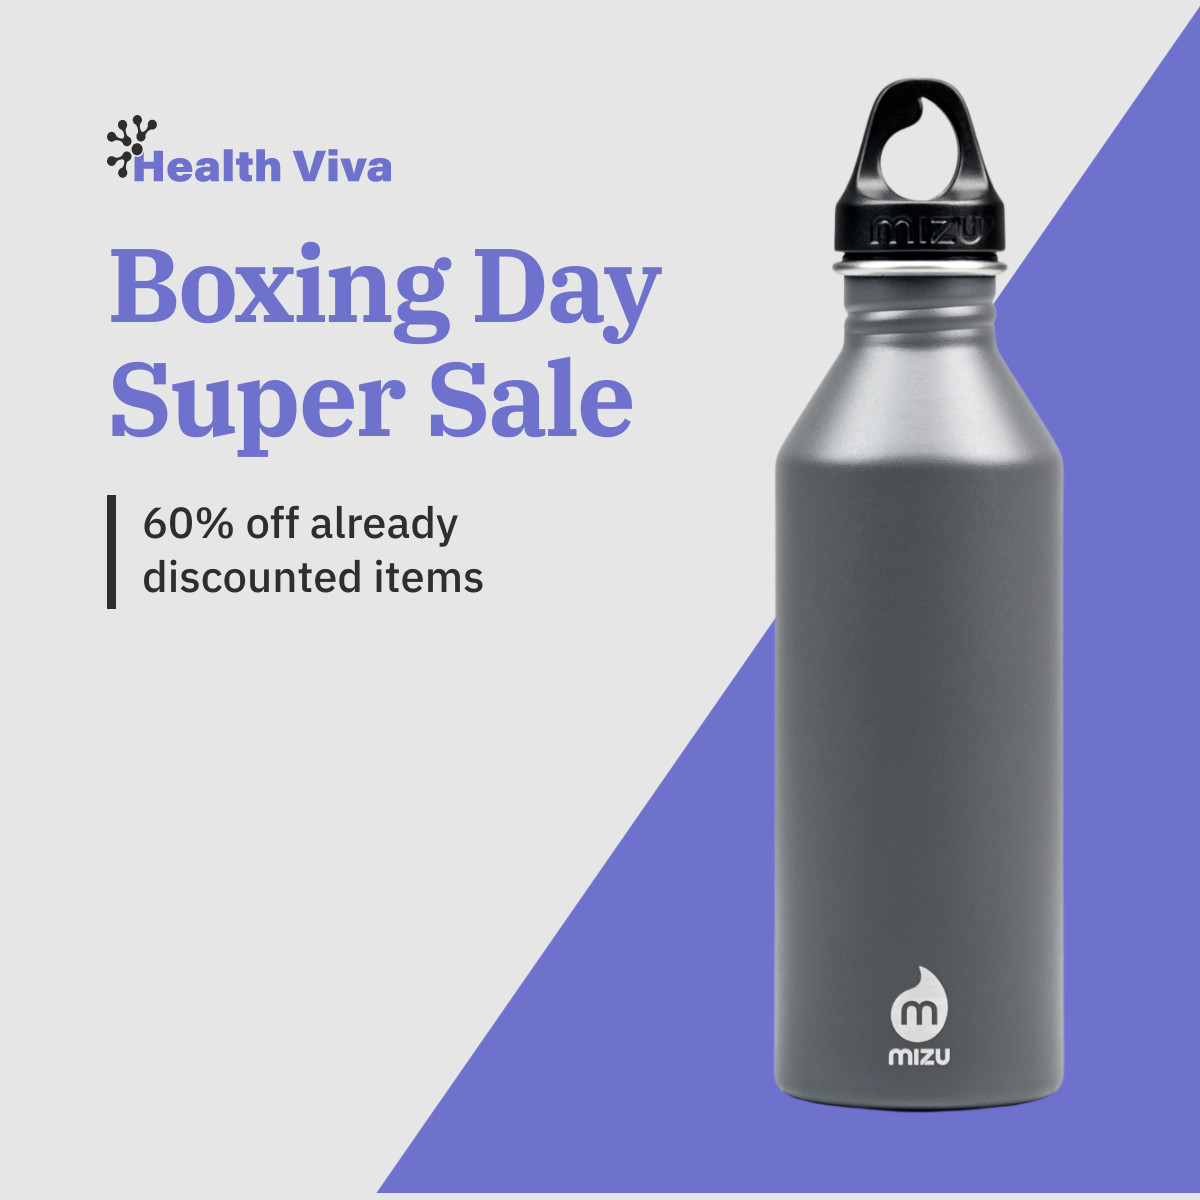 Boxing Day Health Super Sale Inline Rectangle 300x250